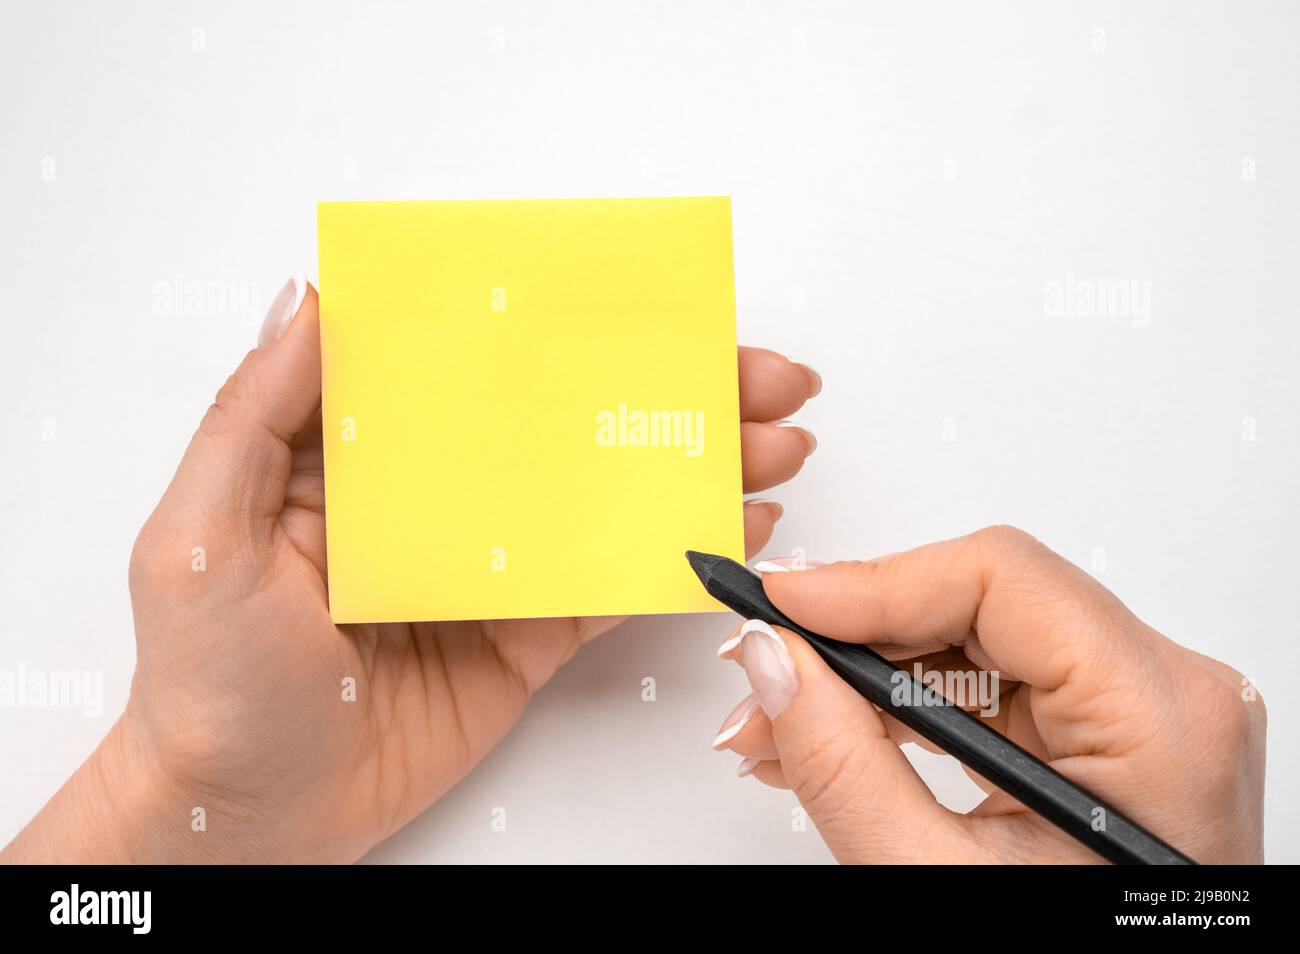 Post it notes Black and White Stock Photos & Images - Alamy